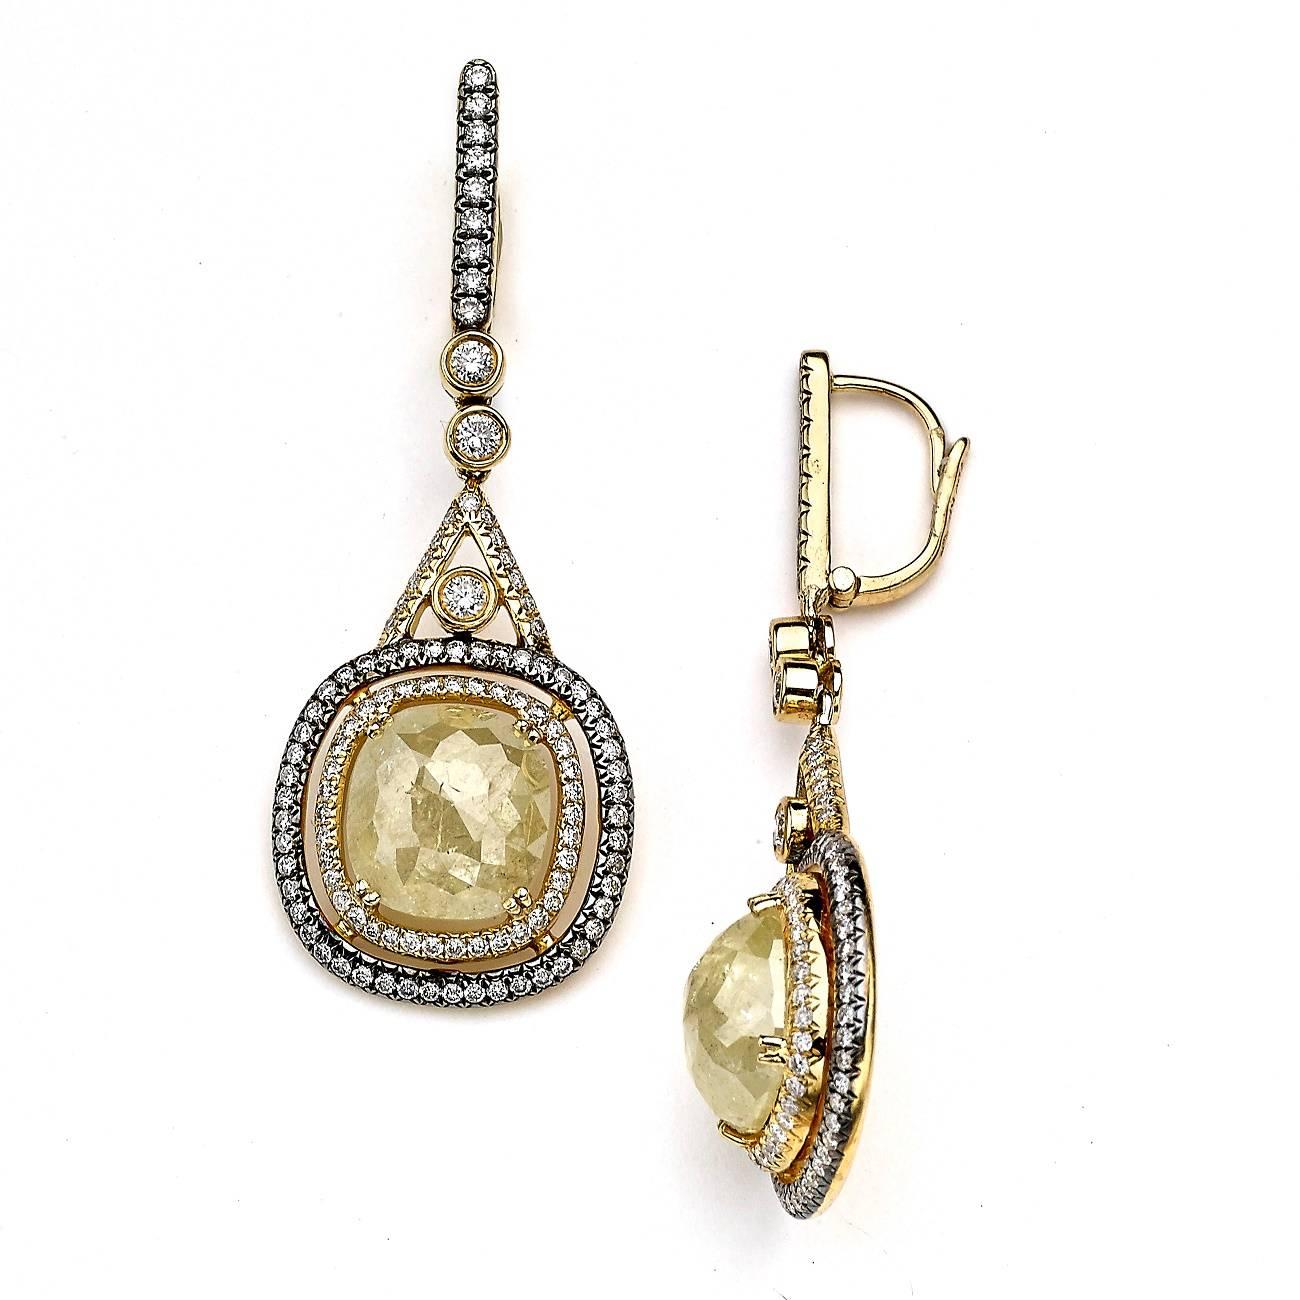 This one of a kind earring is crafted in 18K Yellow Gold centered with A Yellow Rough Diamond and White Gold accent.

Diamond Cut: Round
Diamond weight: 1.79 cts.
Color : H-I
Clarity; SI1-SI2
Setting: Bezel

Diamond Cut : Cushion
Diamond